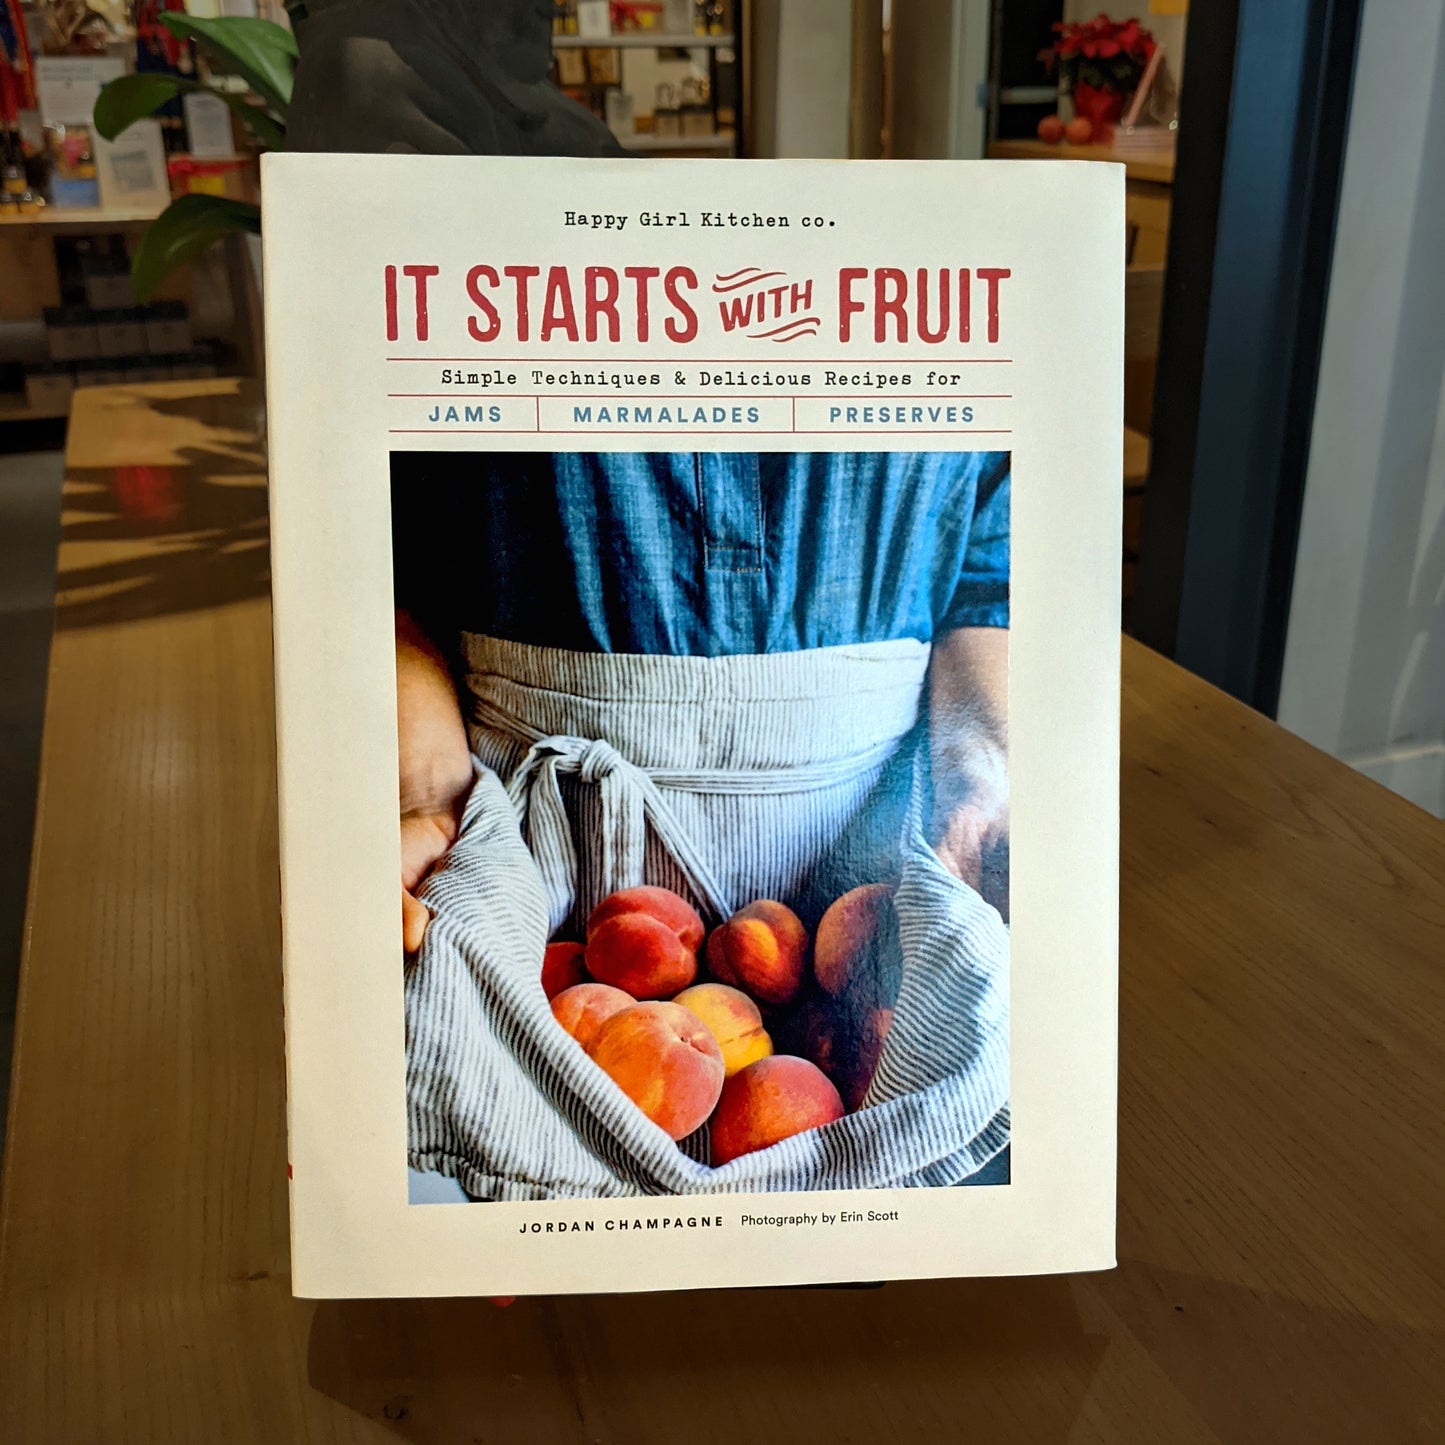 It Starts with Fruit: Simple Techniques and Delicious Recipes for Jams, Marmalades, and Preserves